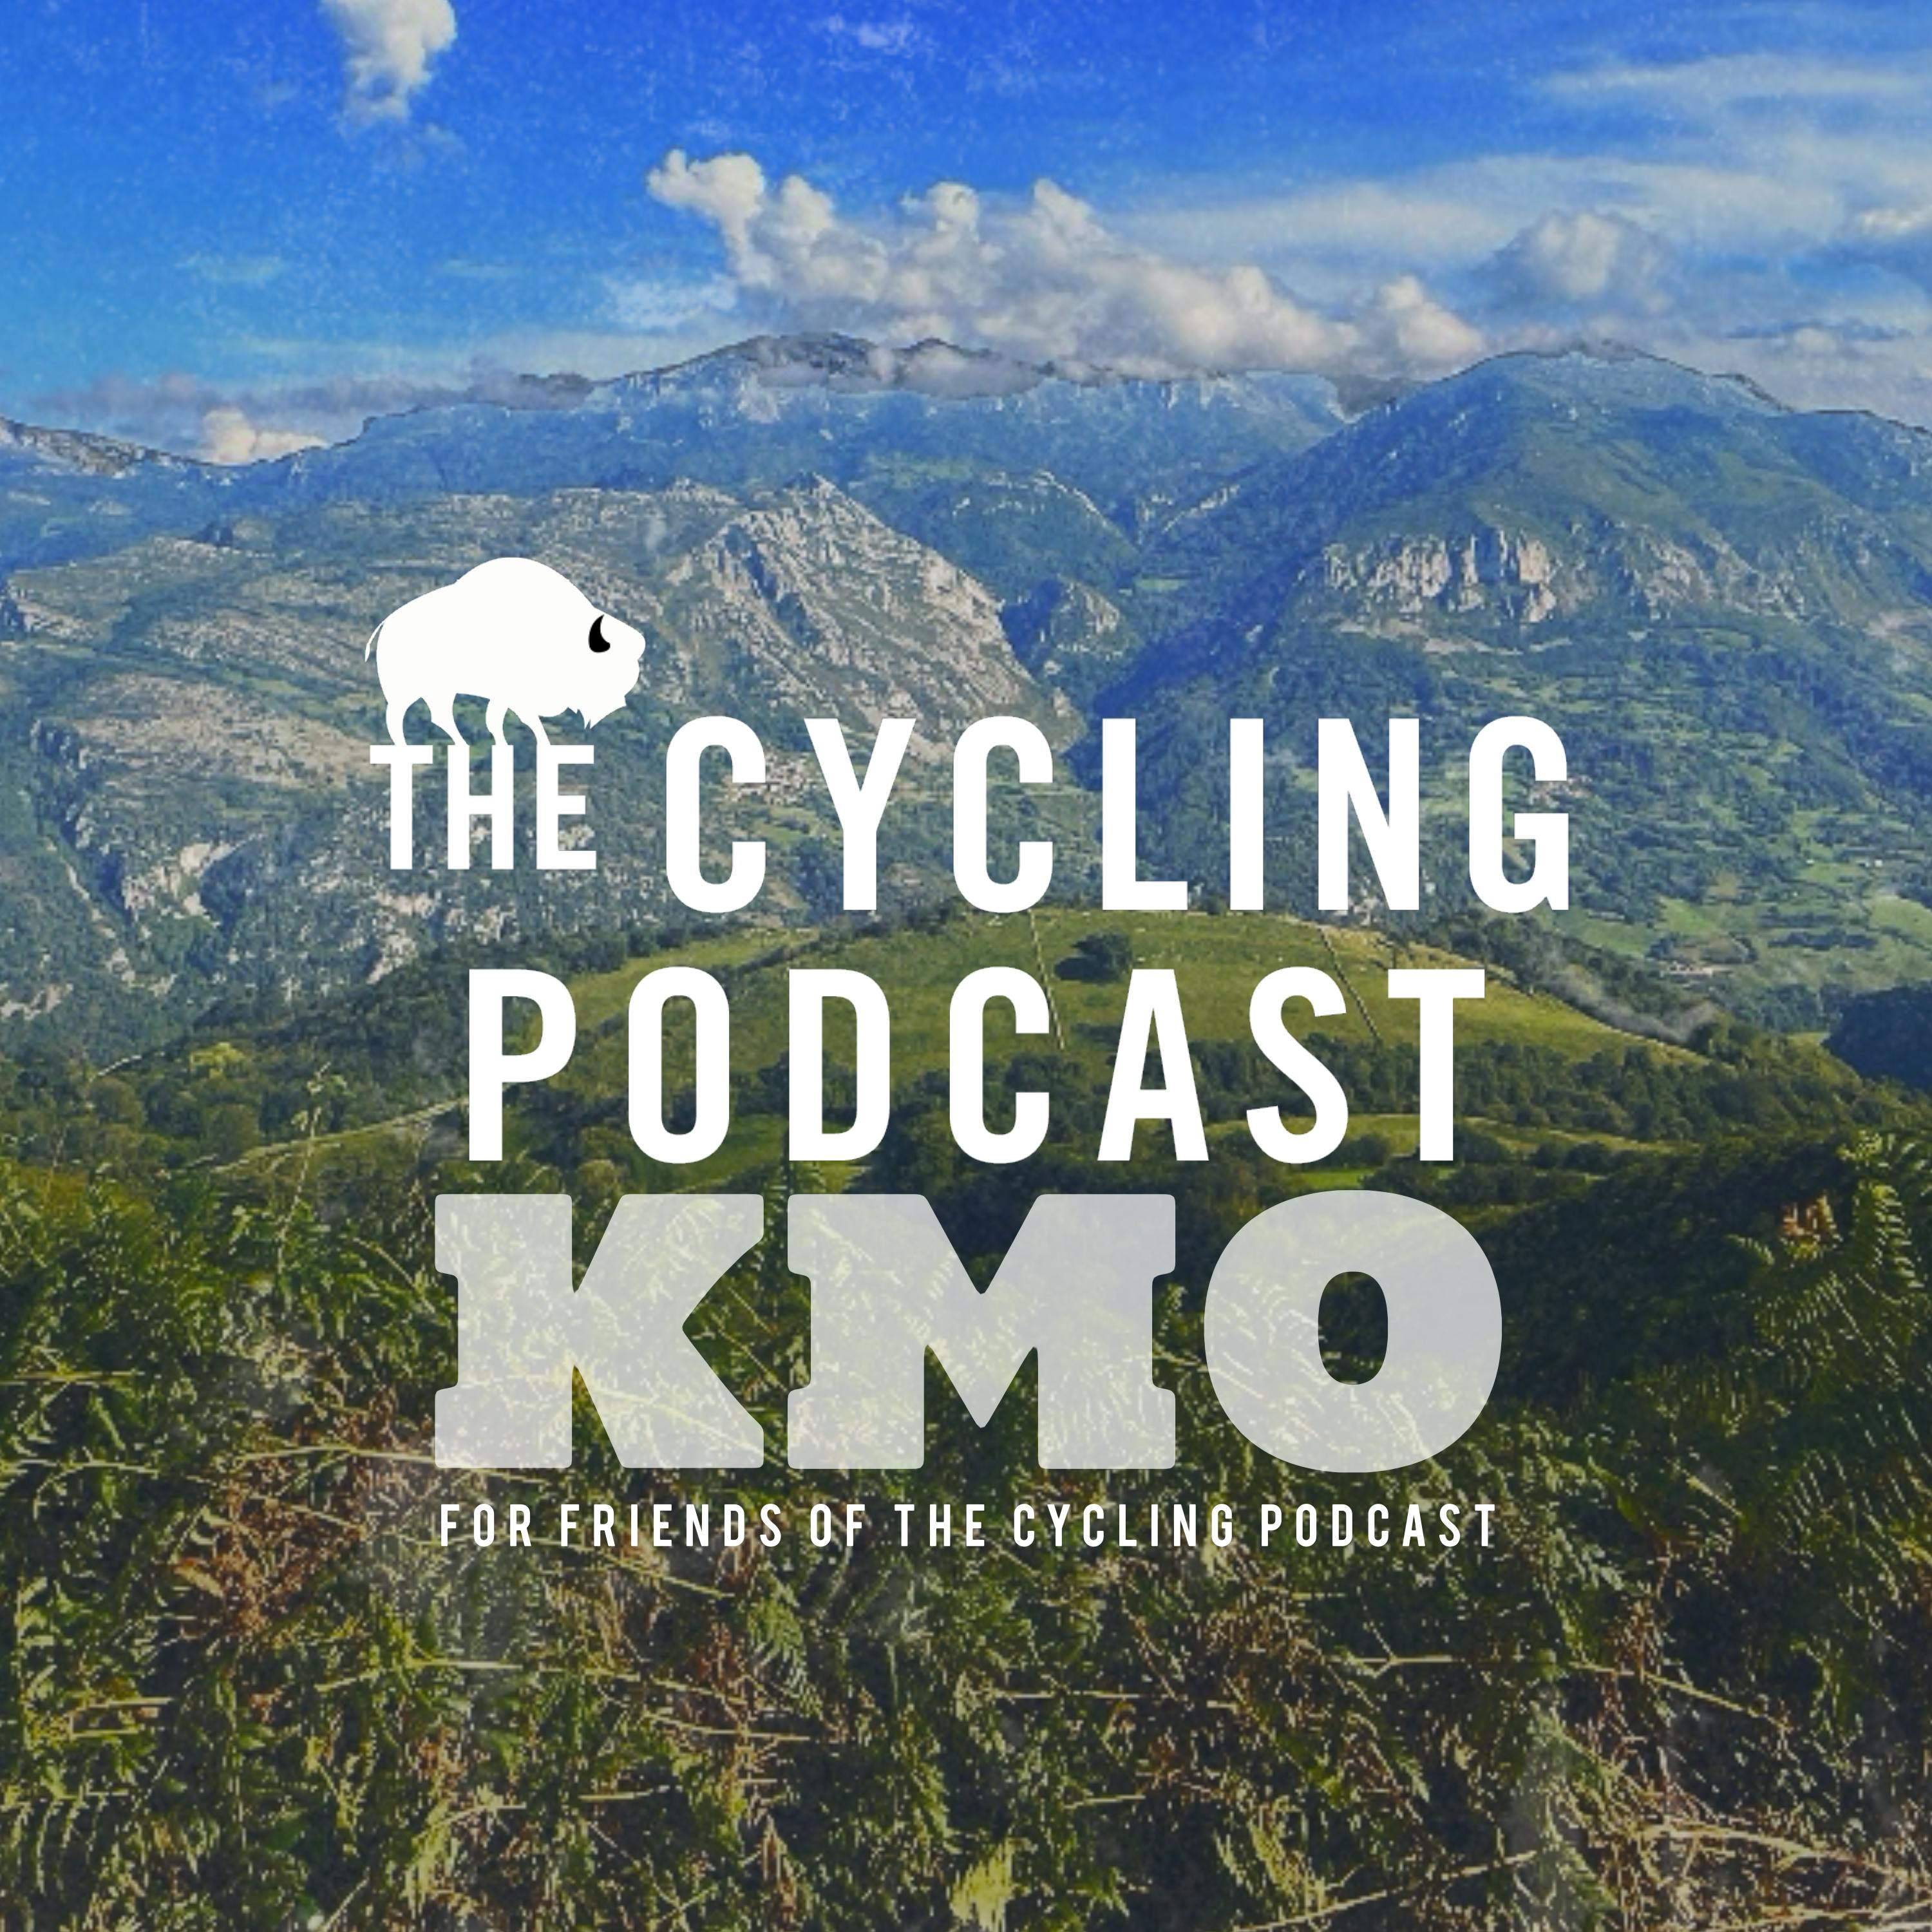 Kilometre 0 for Friends of The Cycling Podcast podcast tile